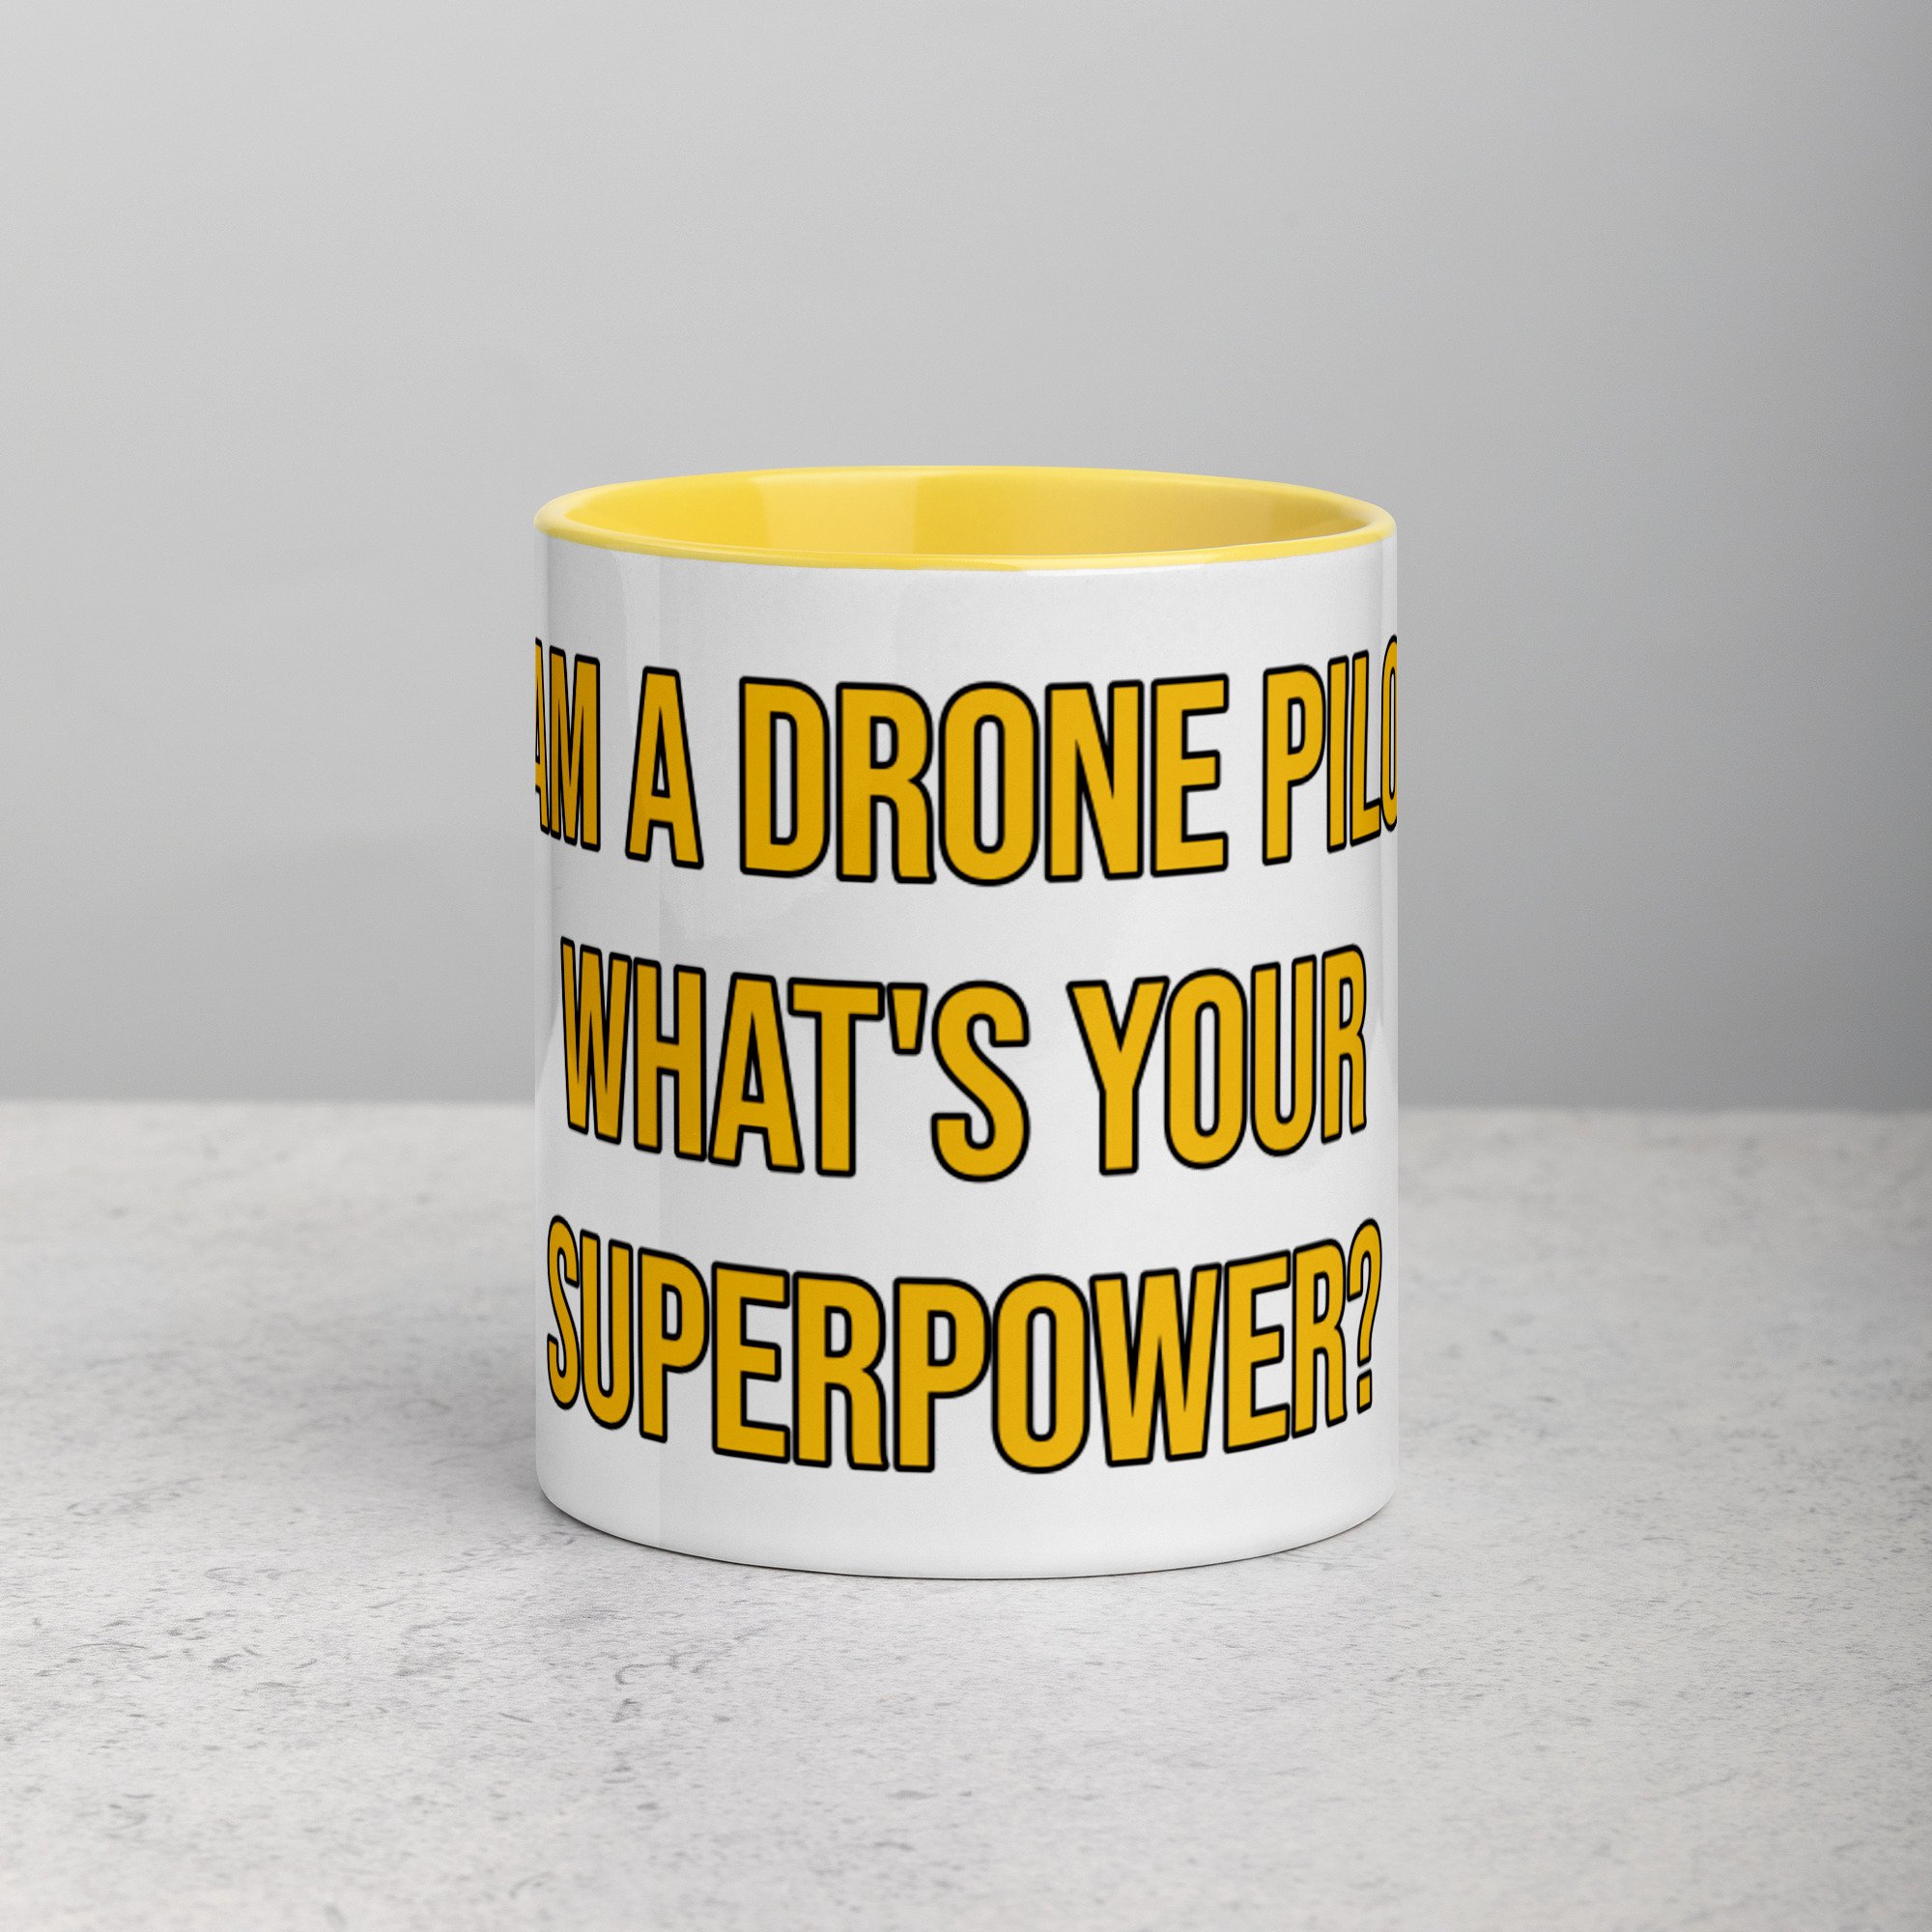 I am a drone pilot what's your superpower yellow mug